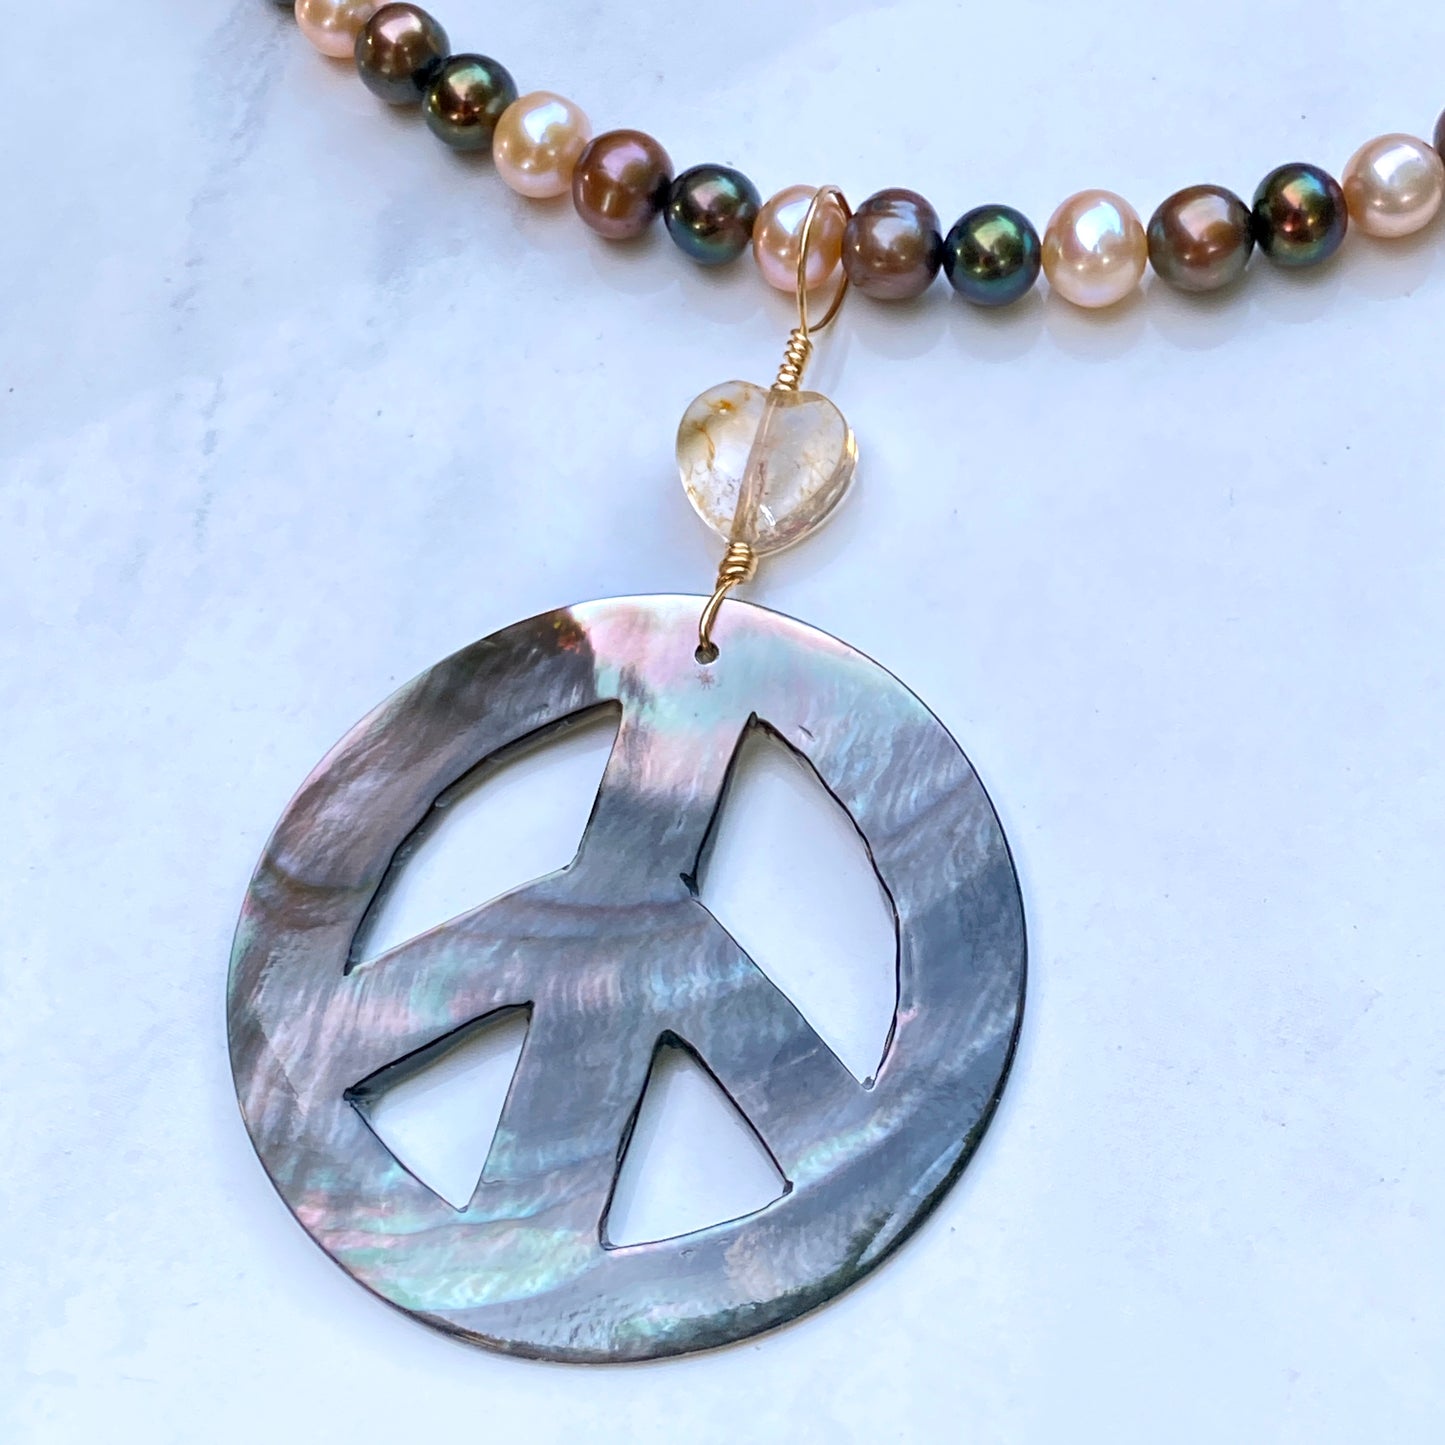 Abalone Peace Sign Hand Wrapped w/ 14 kt gf w/ Citrine Heart on Freshwater Pearls